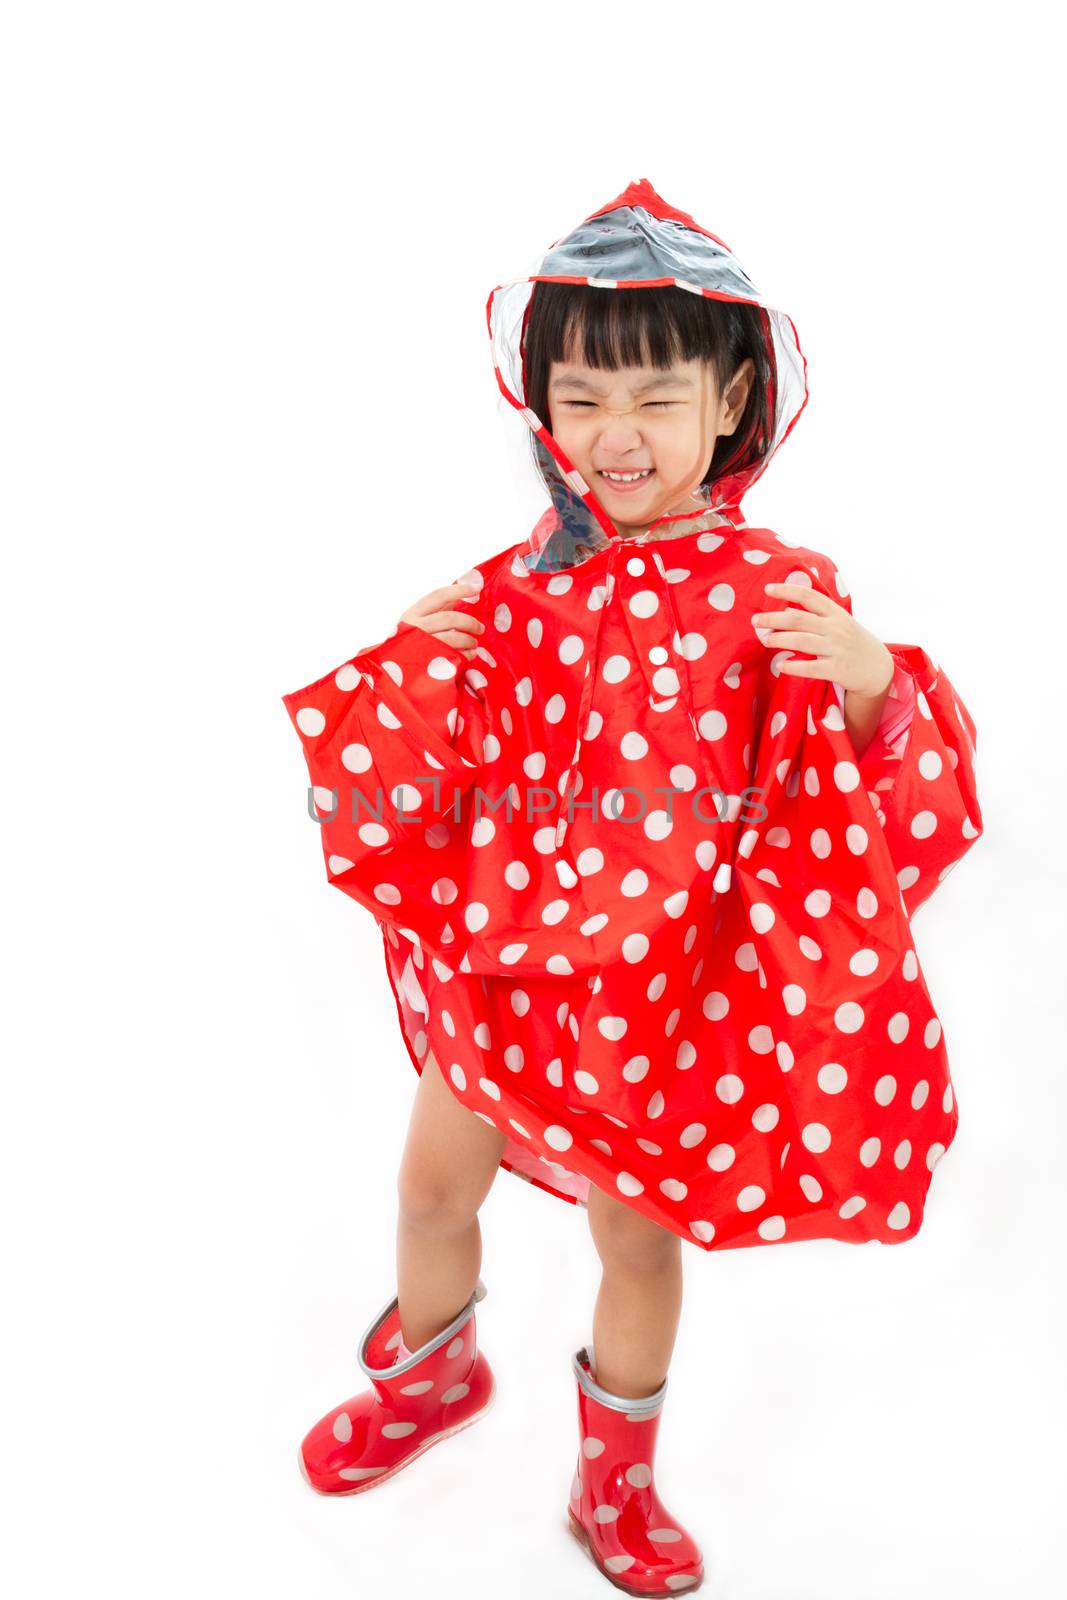 Chinese Little Girl Wearing raincoat and Boots in plain white isolated background.